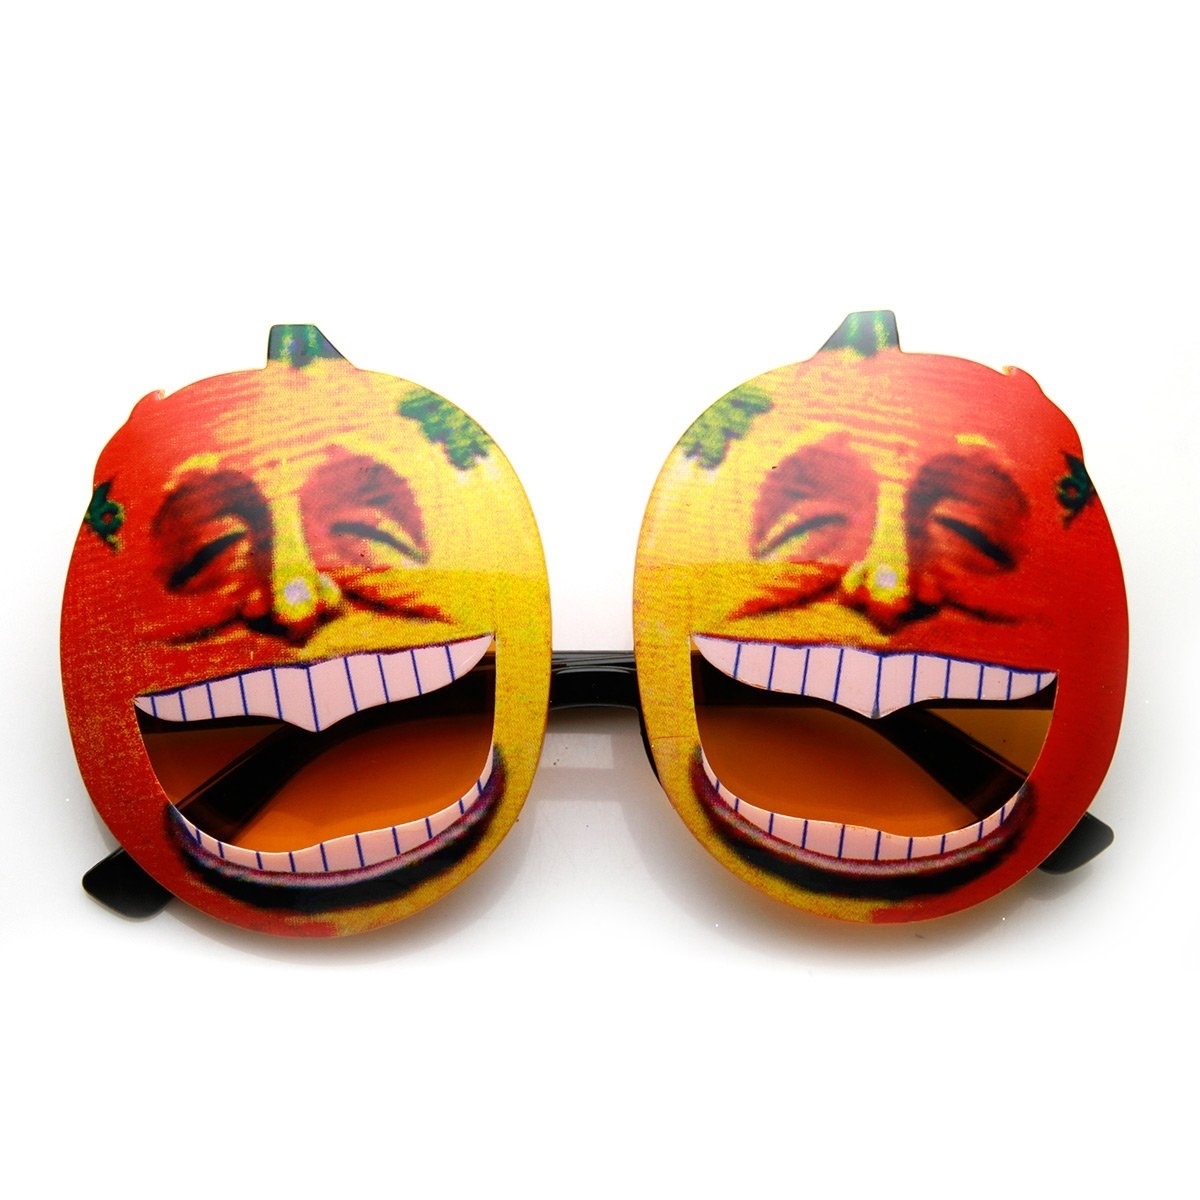 Pumpkin Head Laughing Angry Silly Novelty Halloween Party Sunglasses - Laughing